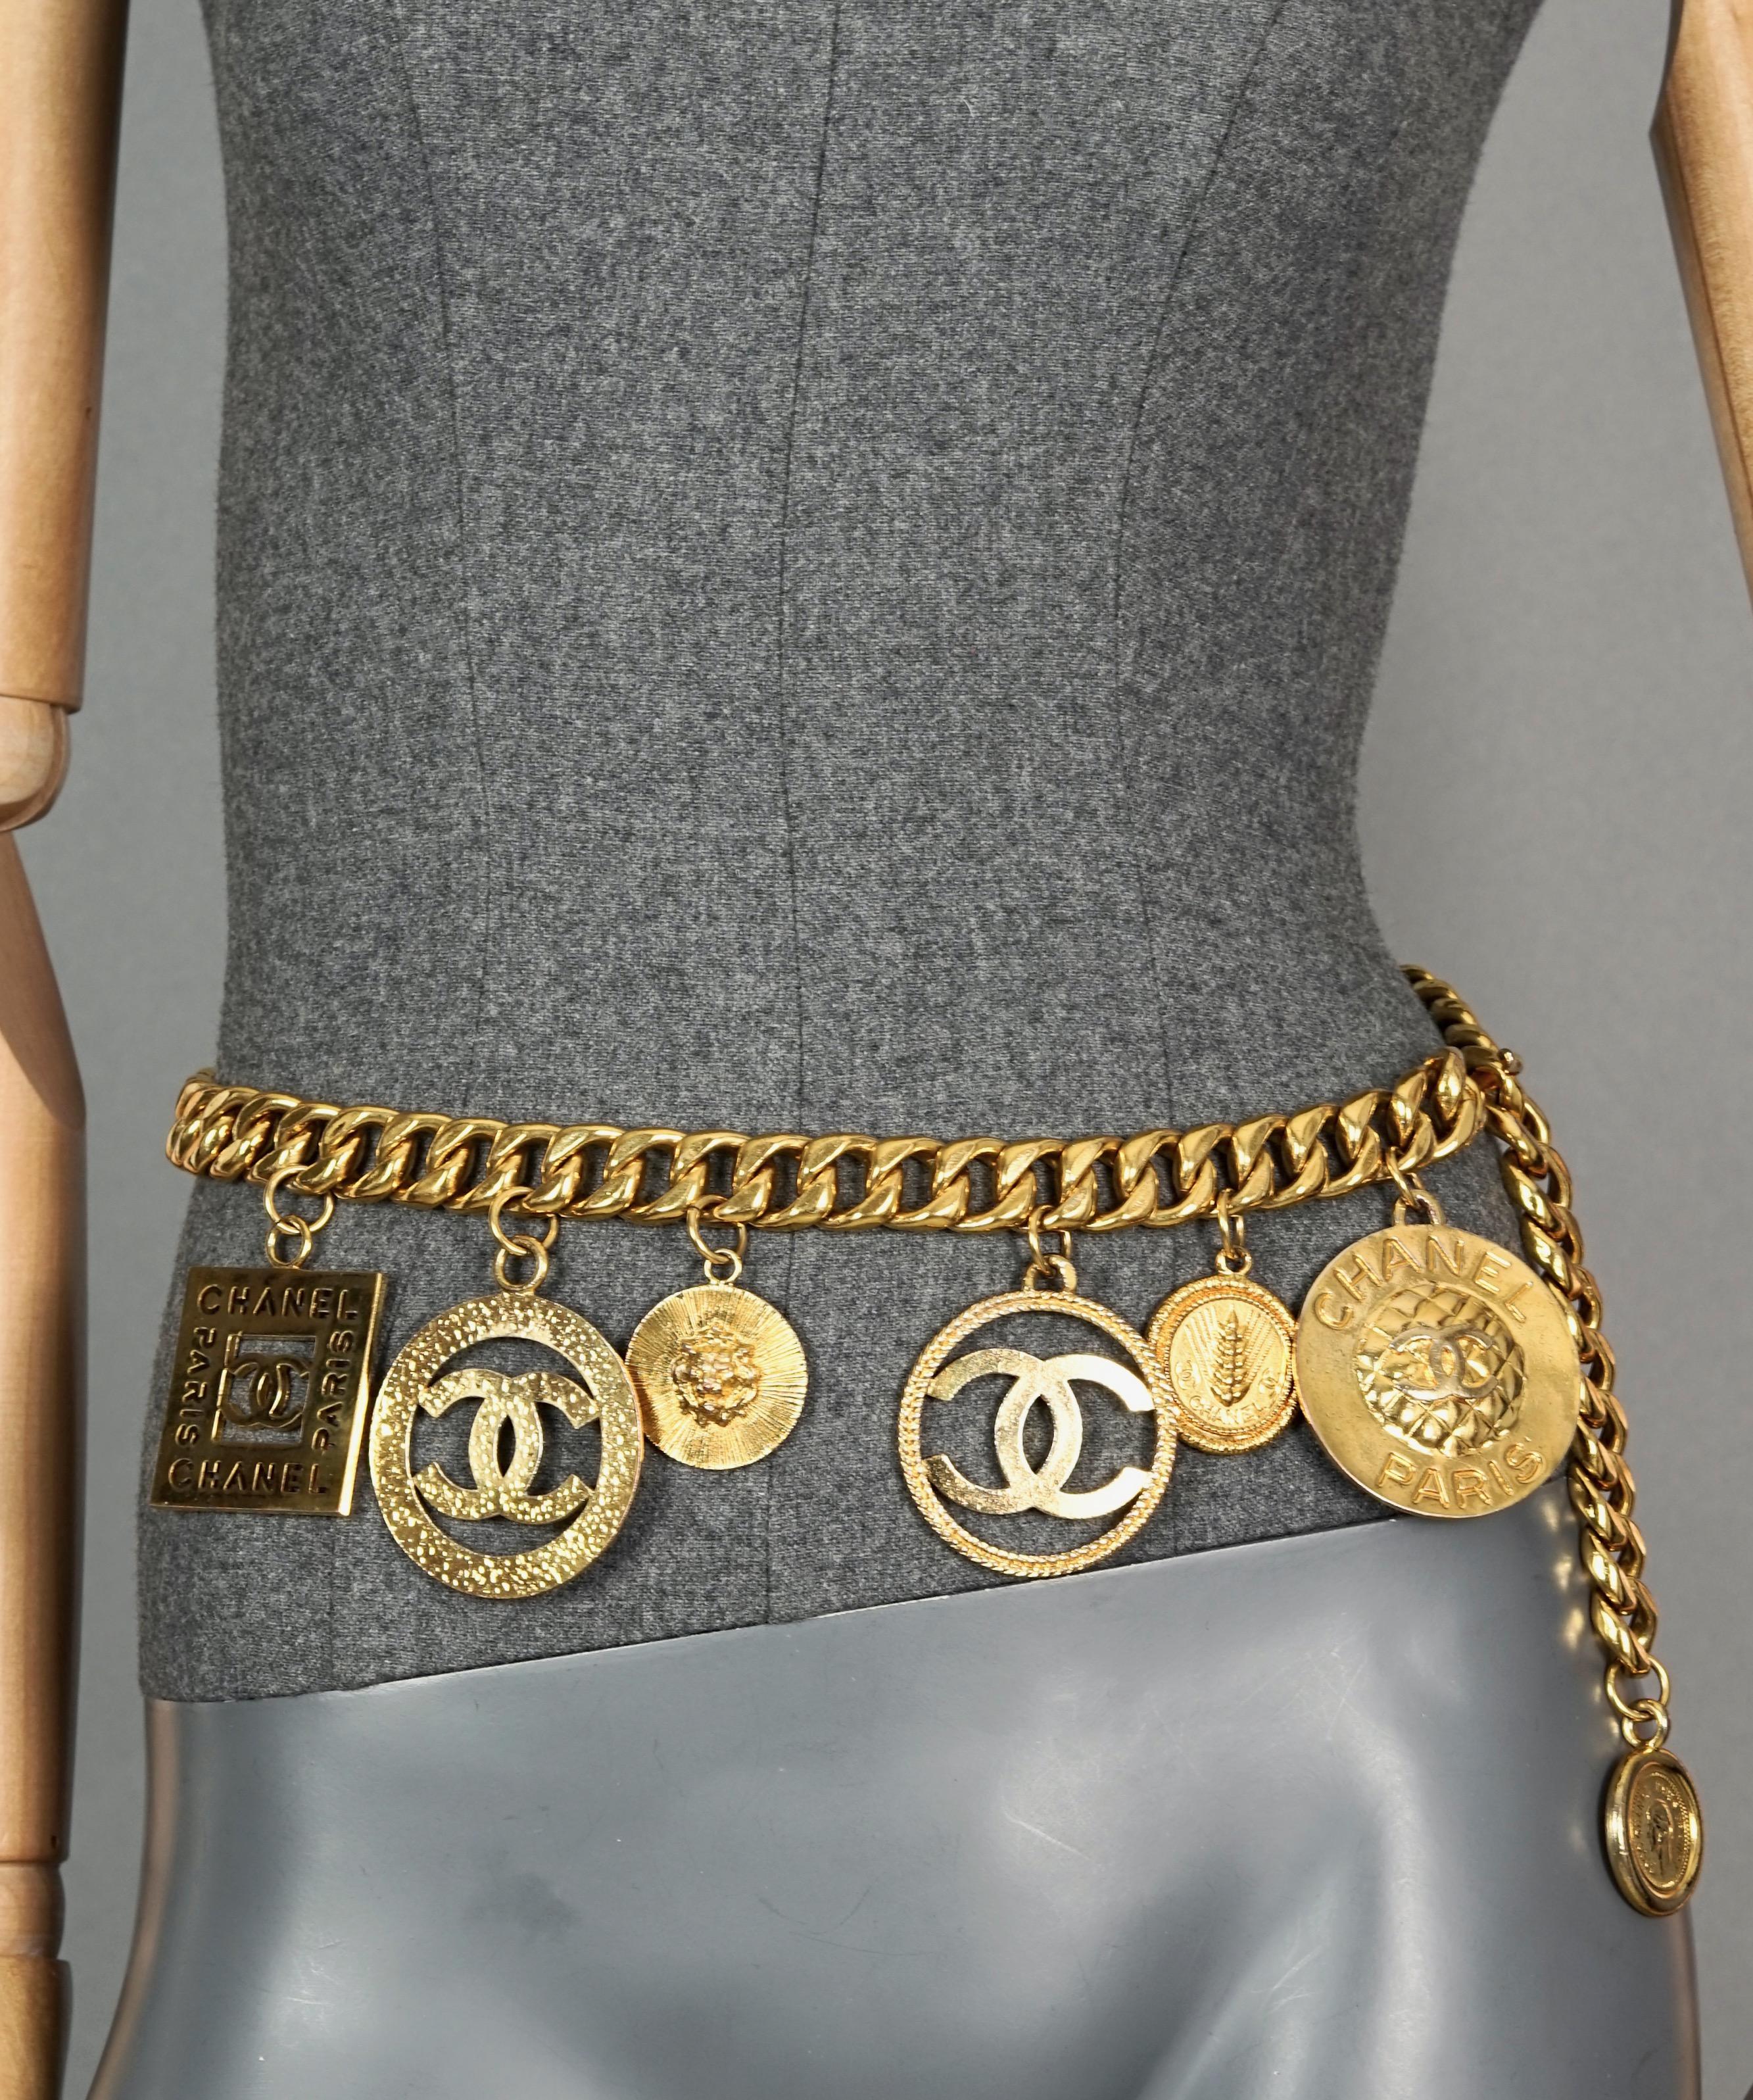 Vintage Jumbo CHANEL Iconic Logo Medallion Charm Necklace Belt

Measurements:
Largest Charm Drop: 3.15 inches (8 cm) 
Overall Length: 33.46 inches (85 cm) adjustable

Features:
- 100% Authentic CHANEL.
- Chunky chain and 7 medallion charms .
-